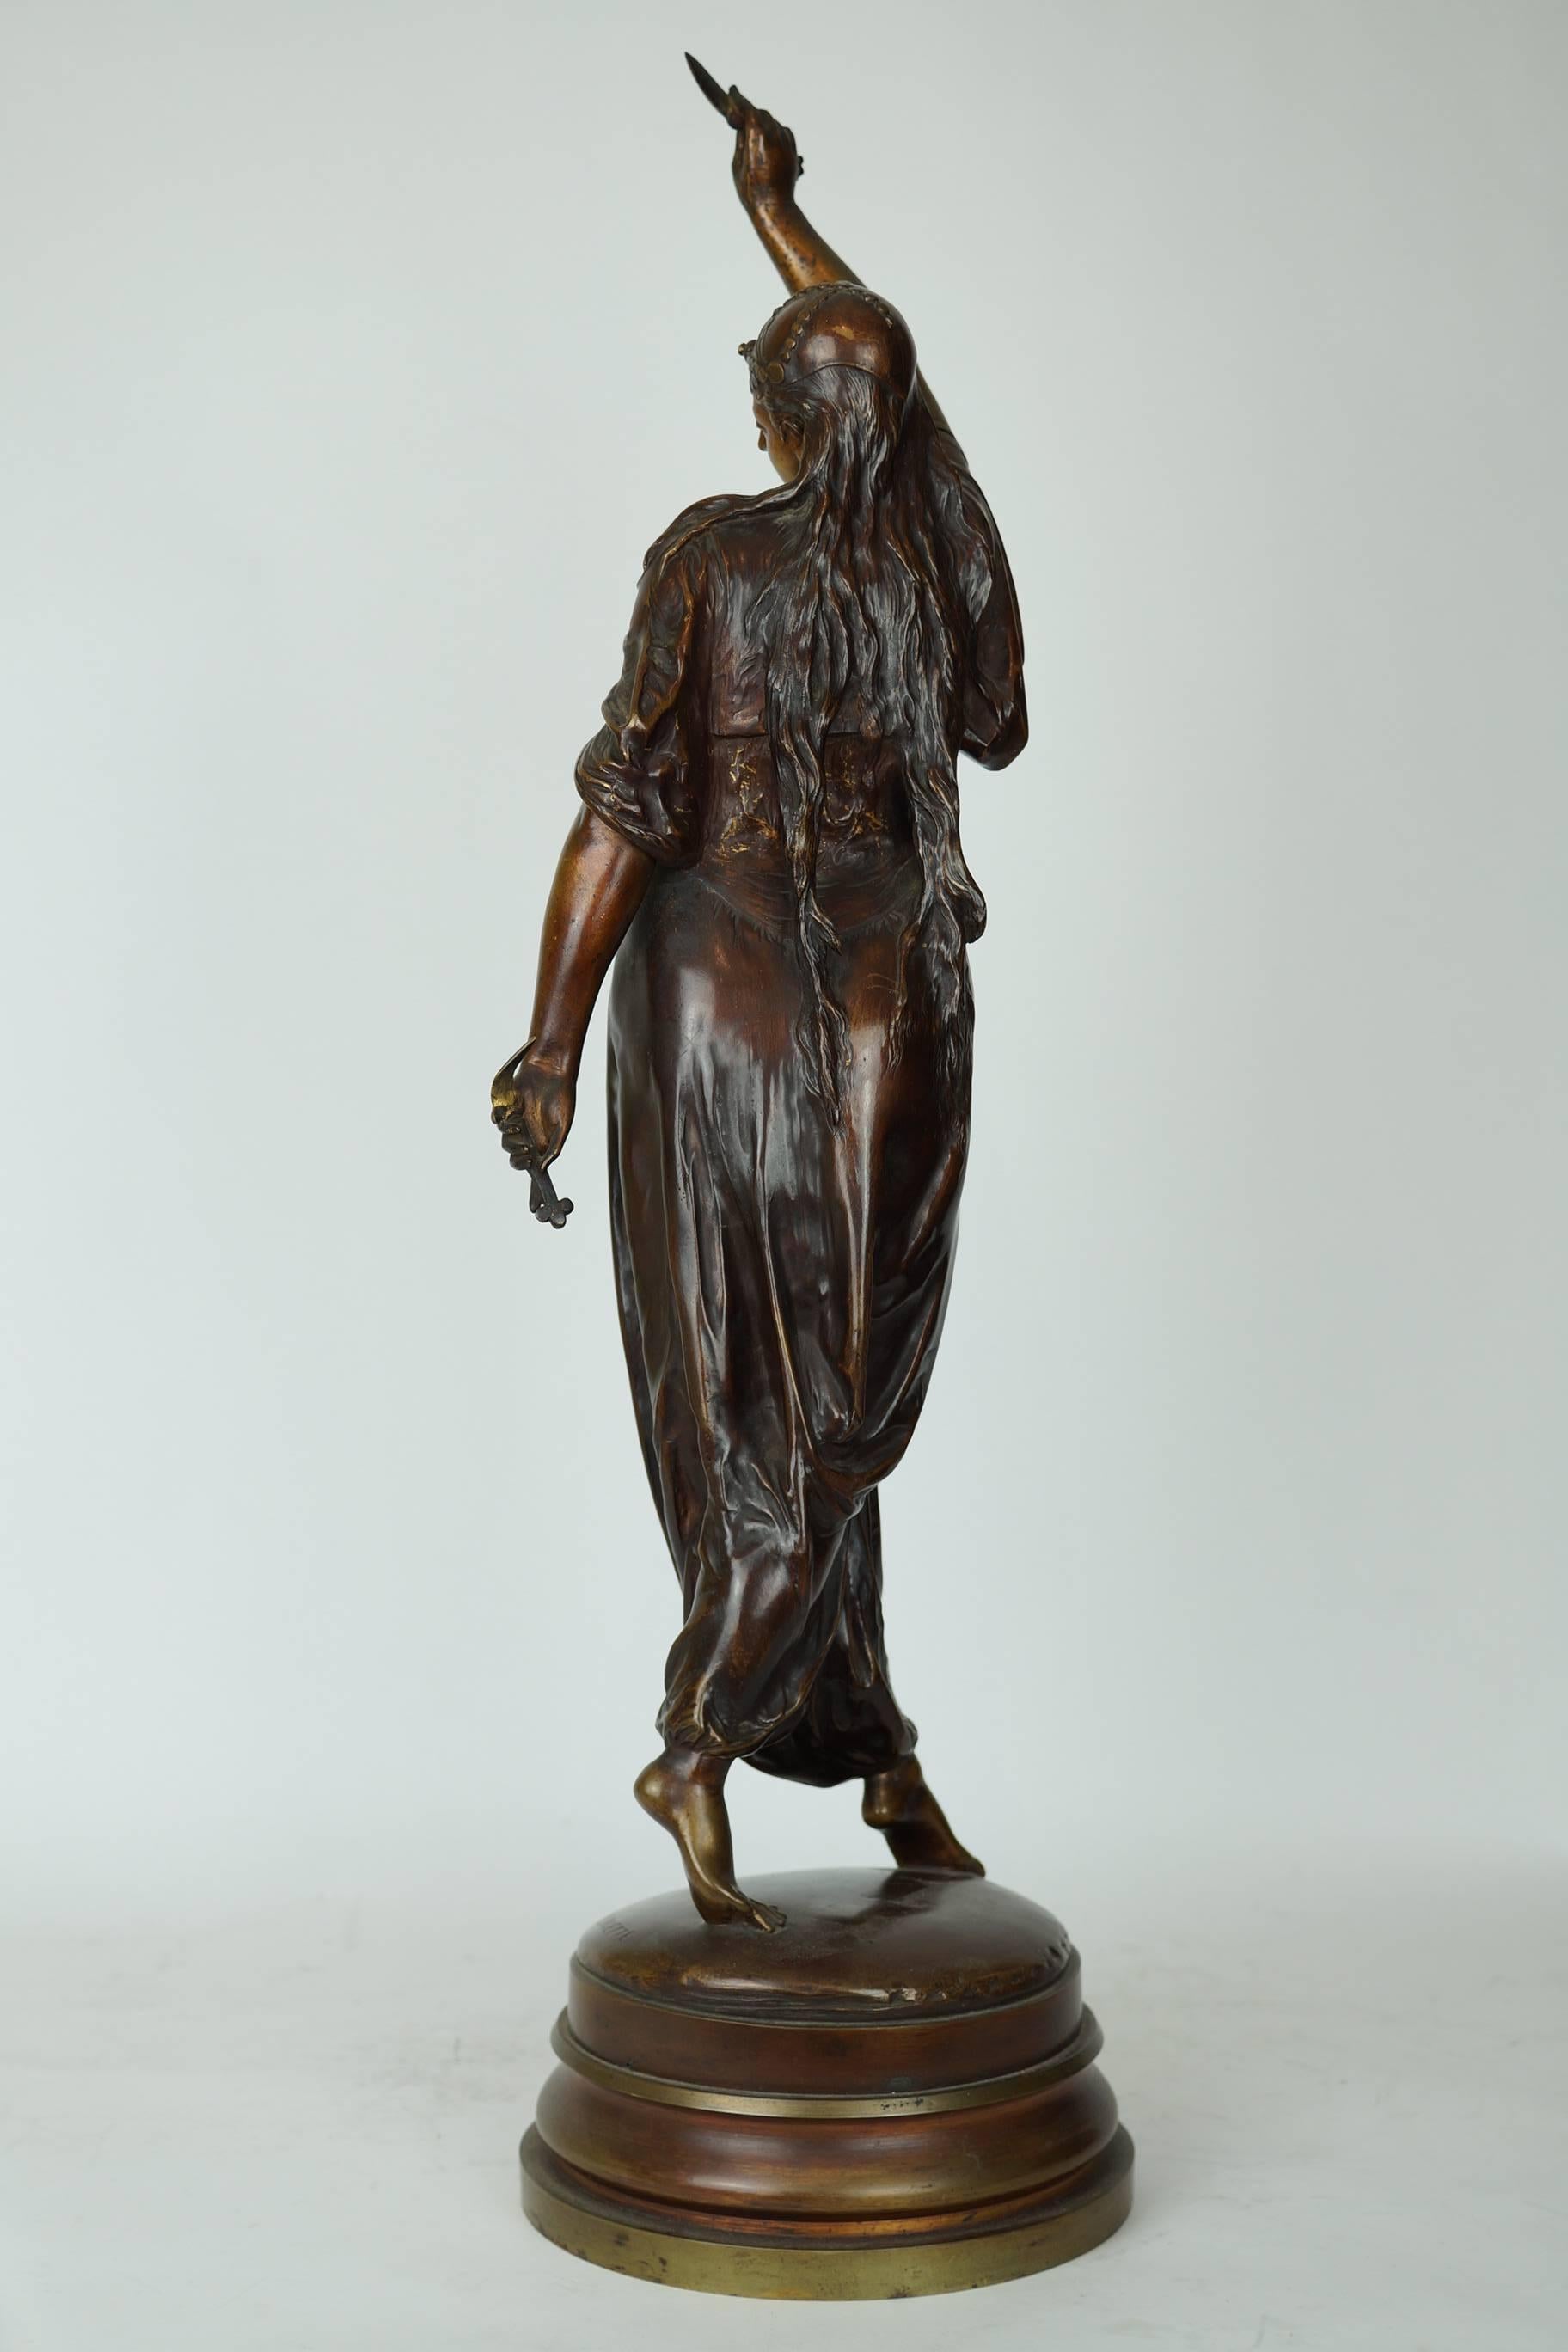 French, 19th century orientalist bronze Figure of standing Turkish woman dancer holding a knife in her hand with very elaborate jewelry around her neck. Signed Lalouette.